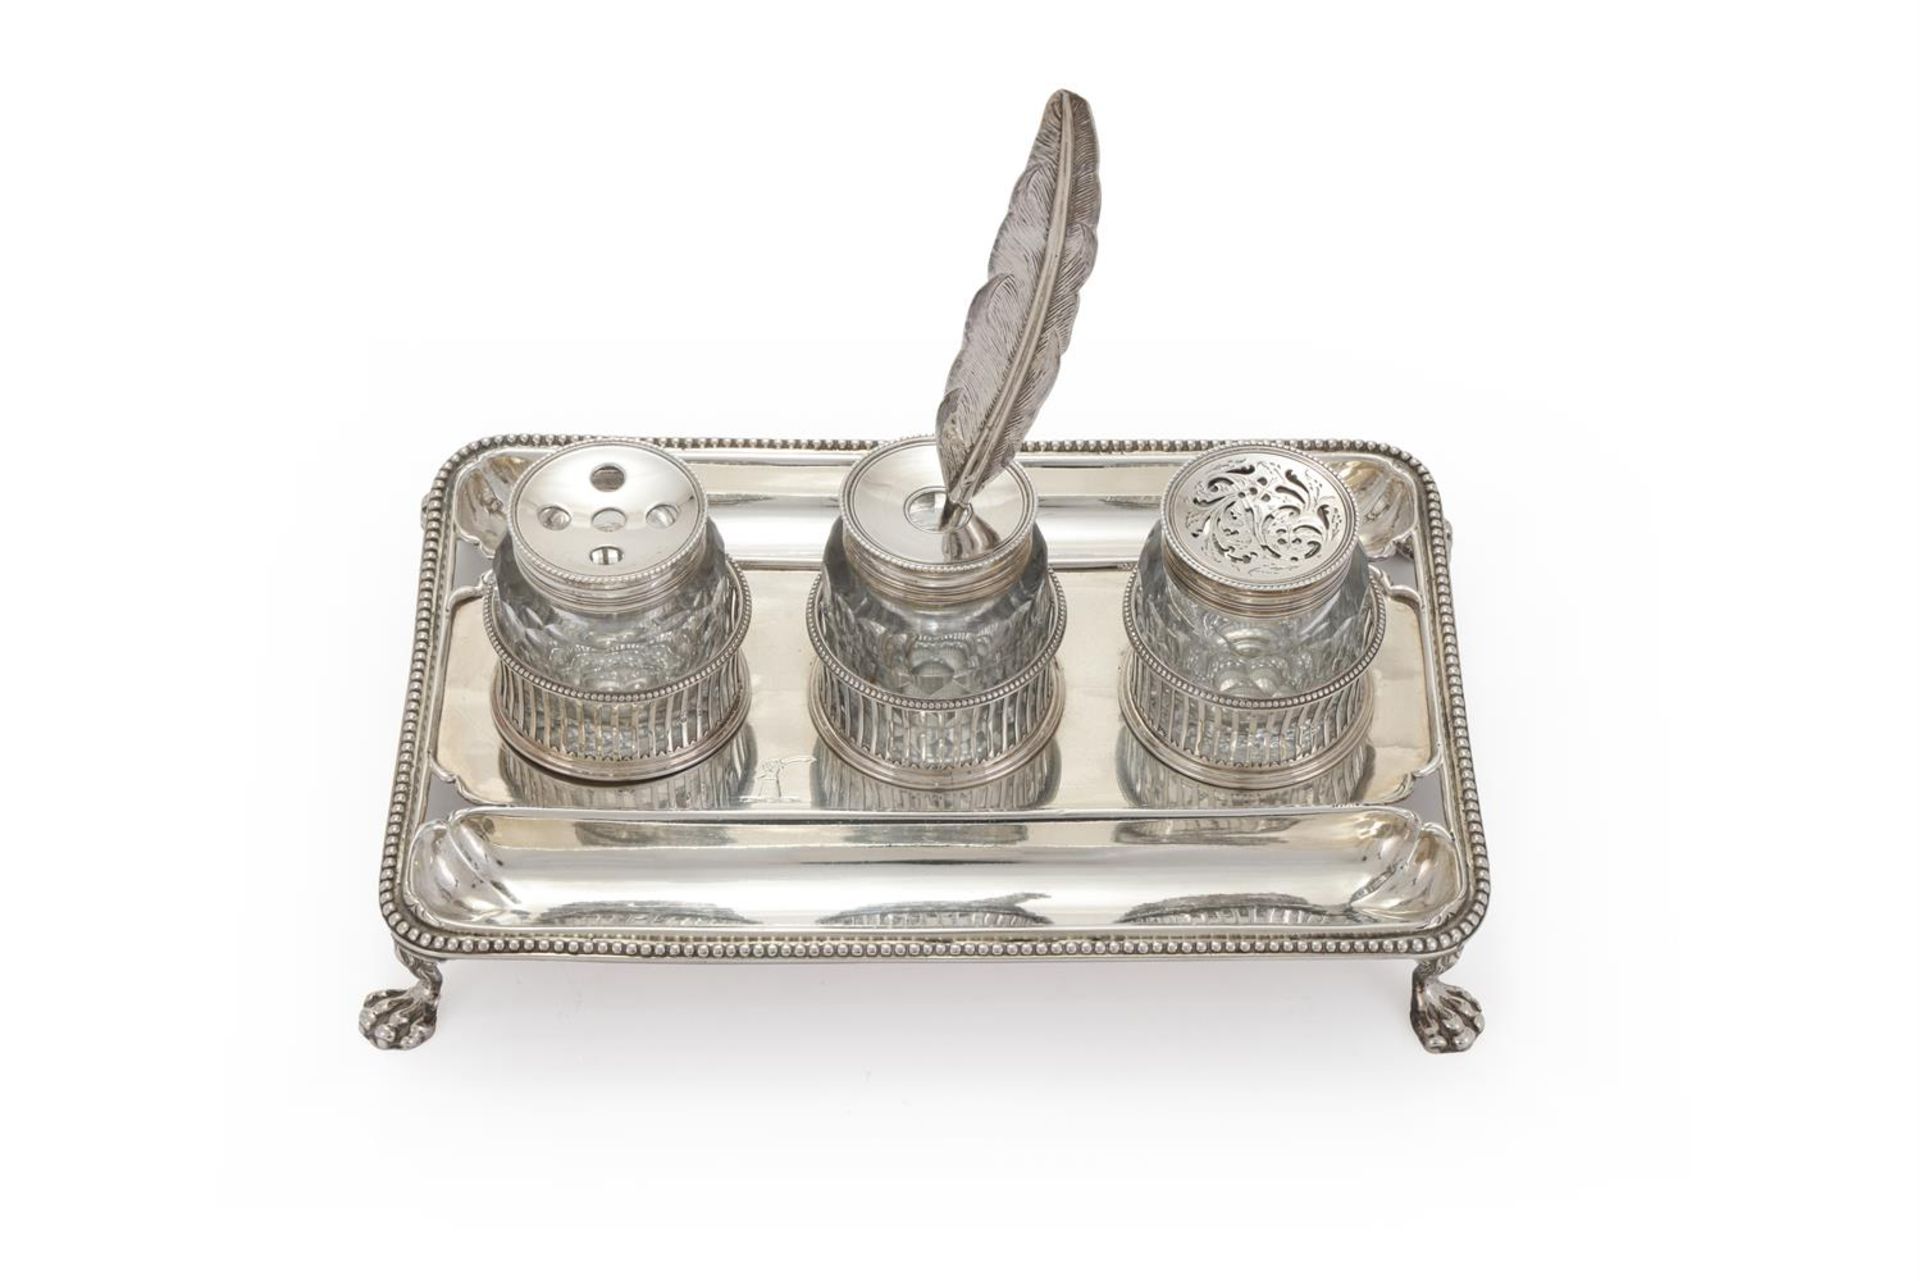 A GEORGE III SILVER OBLONG INKSTAND - Image 4 of 7